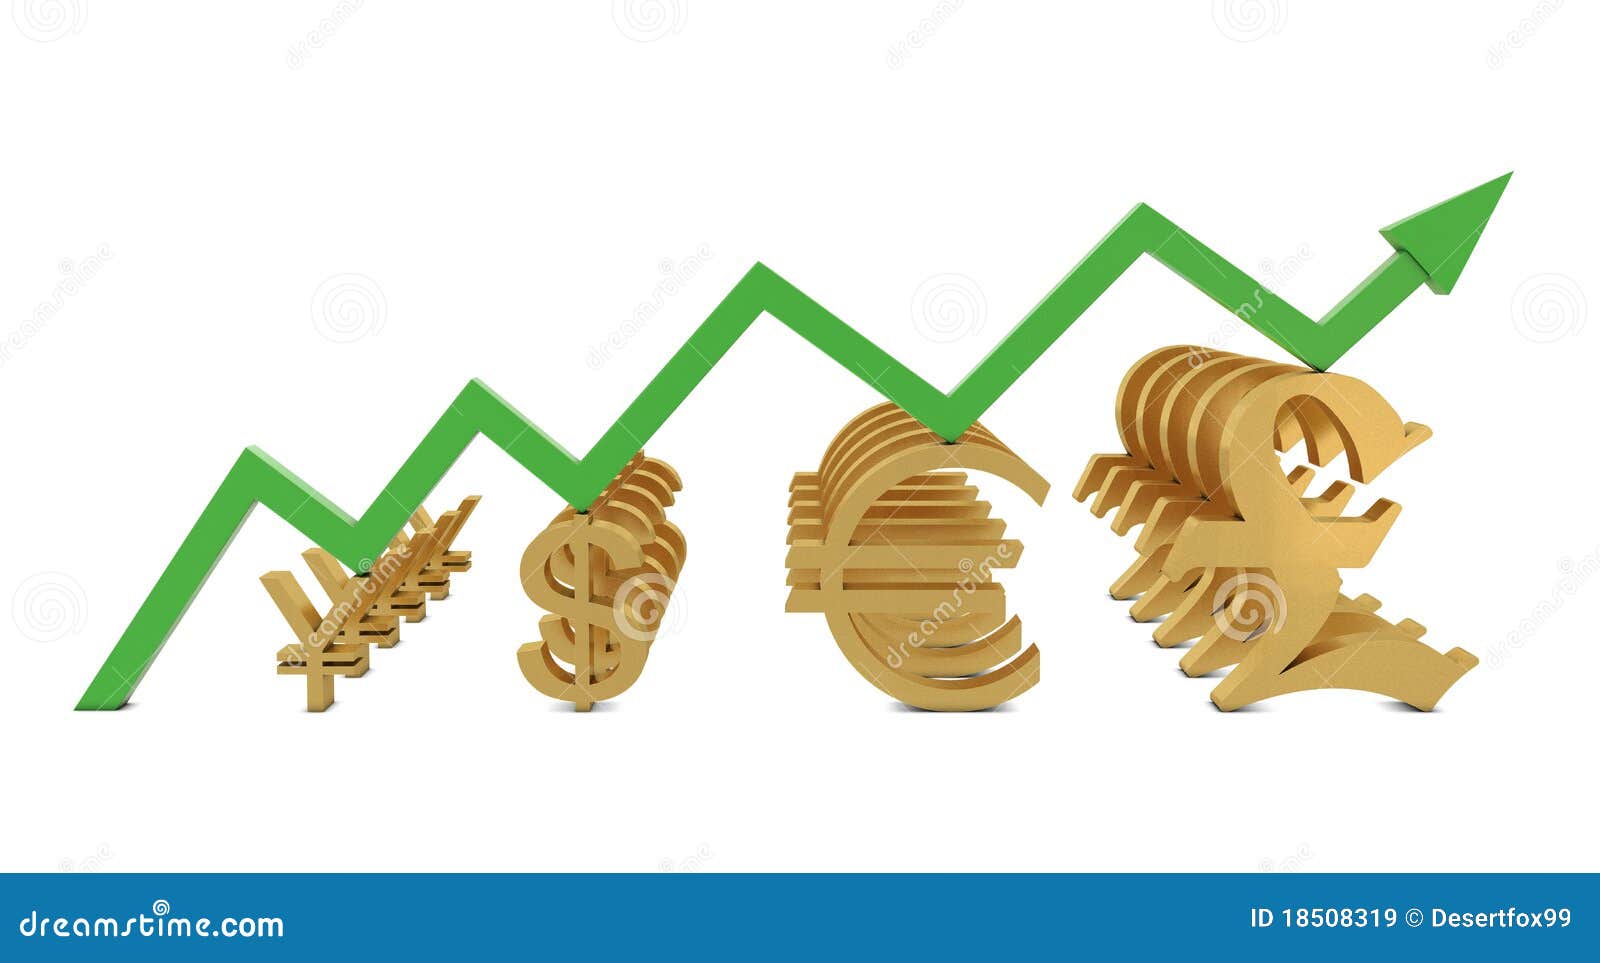 Golden Currencies Symbols And Green Growth Line Royalty Free Stock